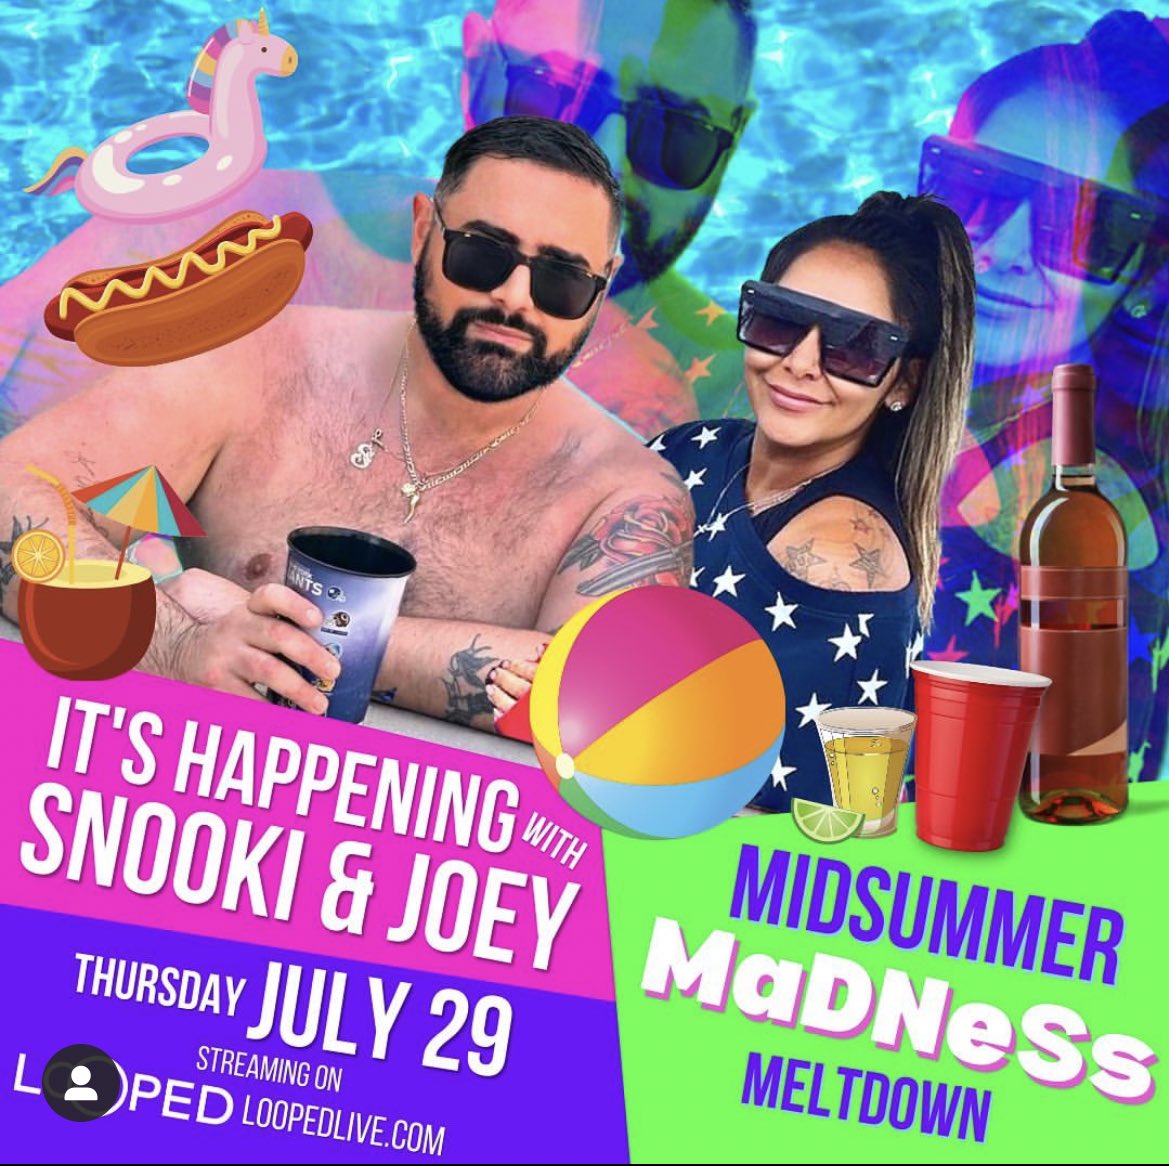 ITS HAPPENING 🥂🔥 with a special guest..... MISS JWOWW MARIE POPPERS 🙏🏽 @JENNIWOWW 
Tix:  